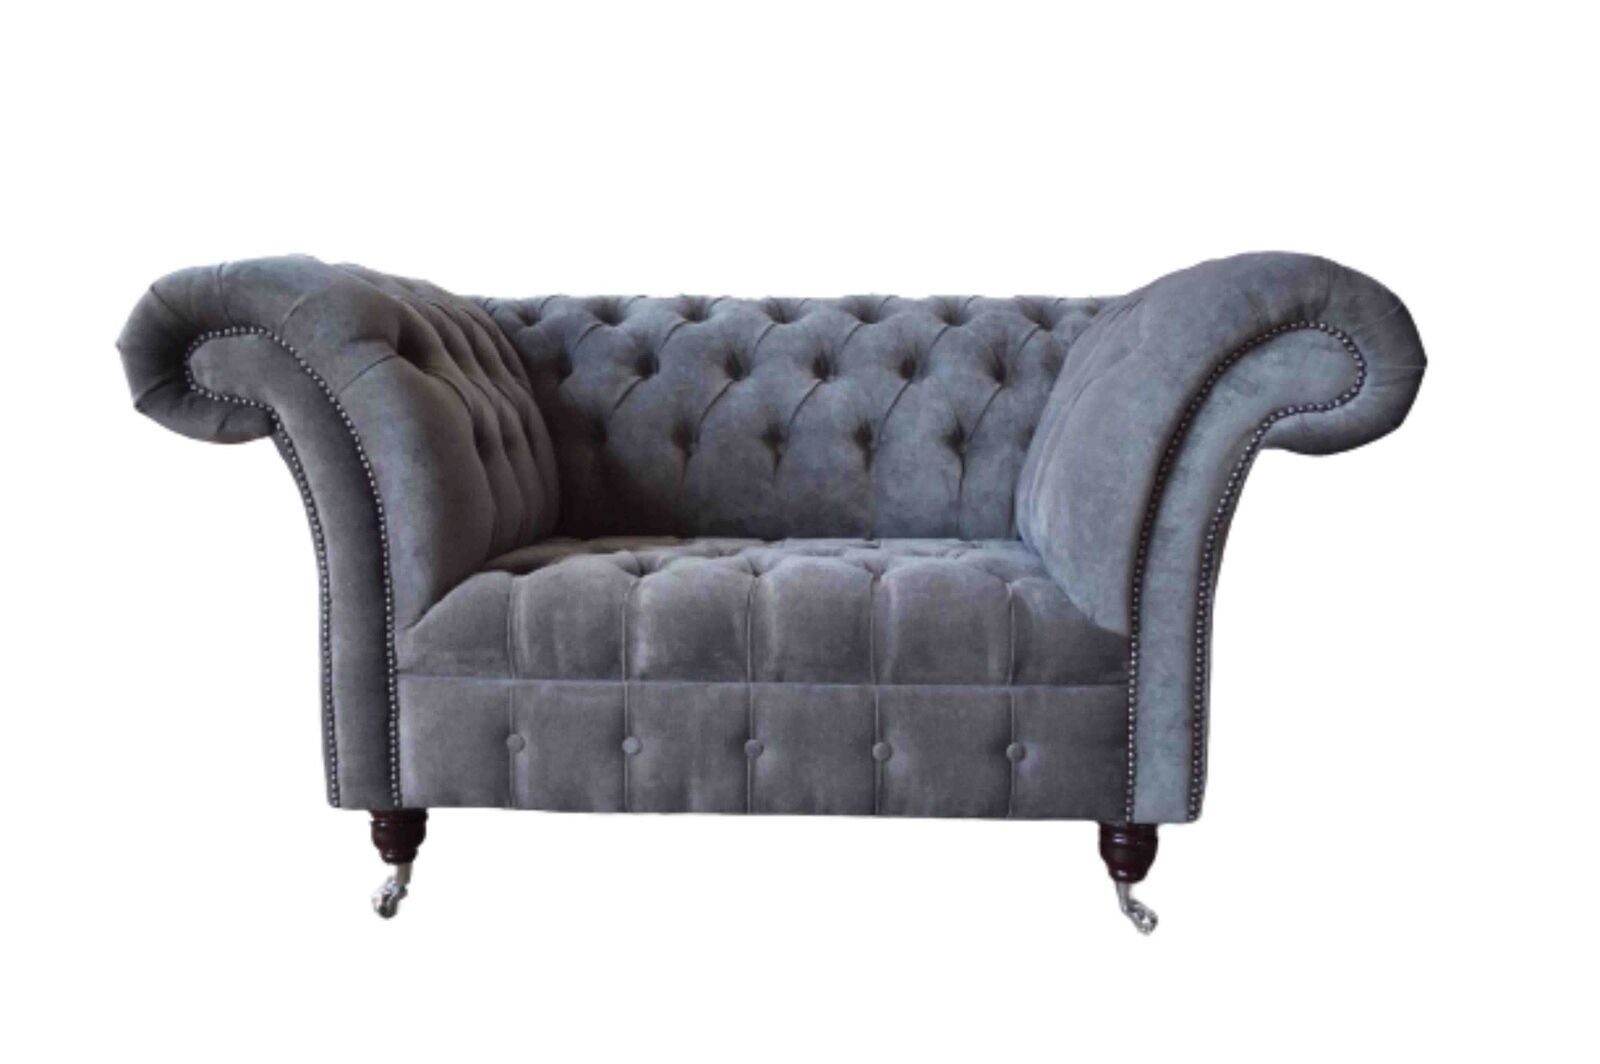 JVmoebel Sofa Chesterfield Sofa 1.5 Sitzer Couch Polster Design Sofas Sitz Polster, Made In Europe